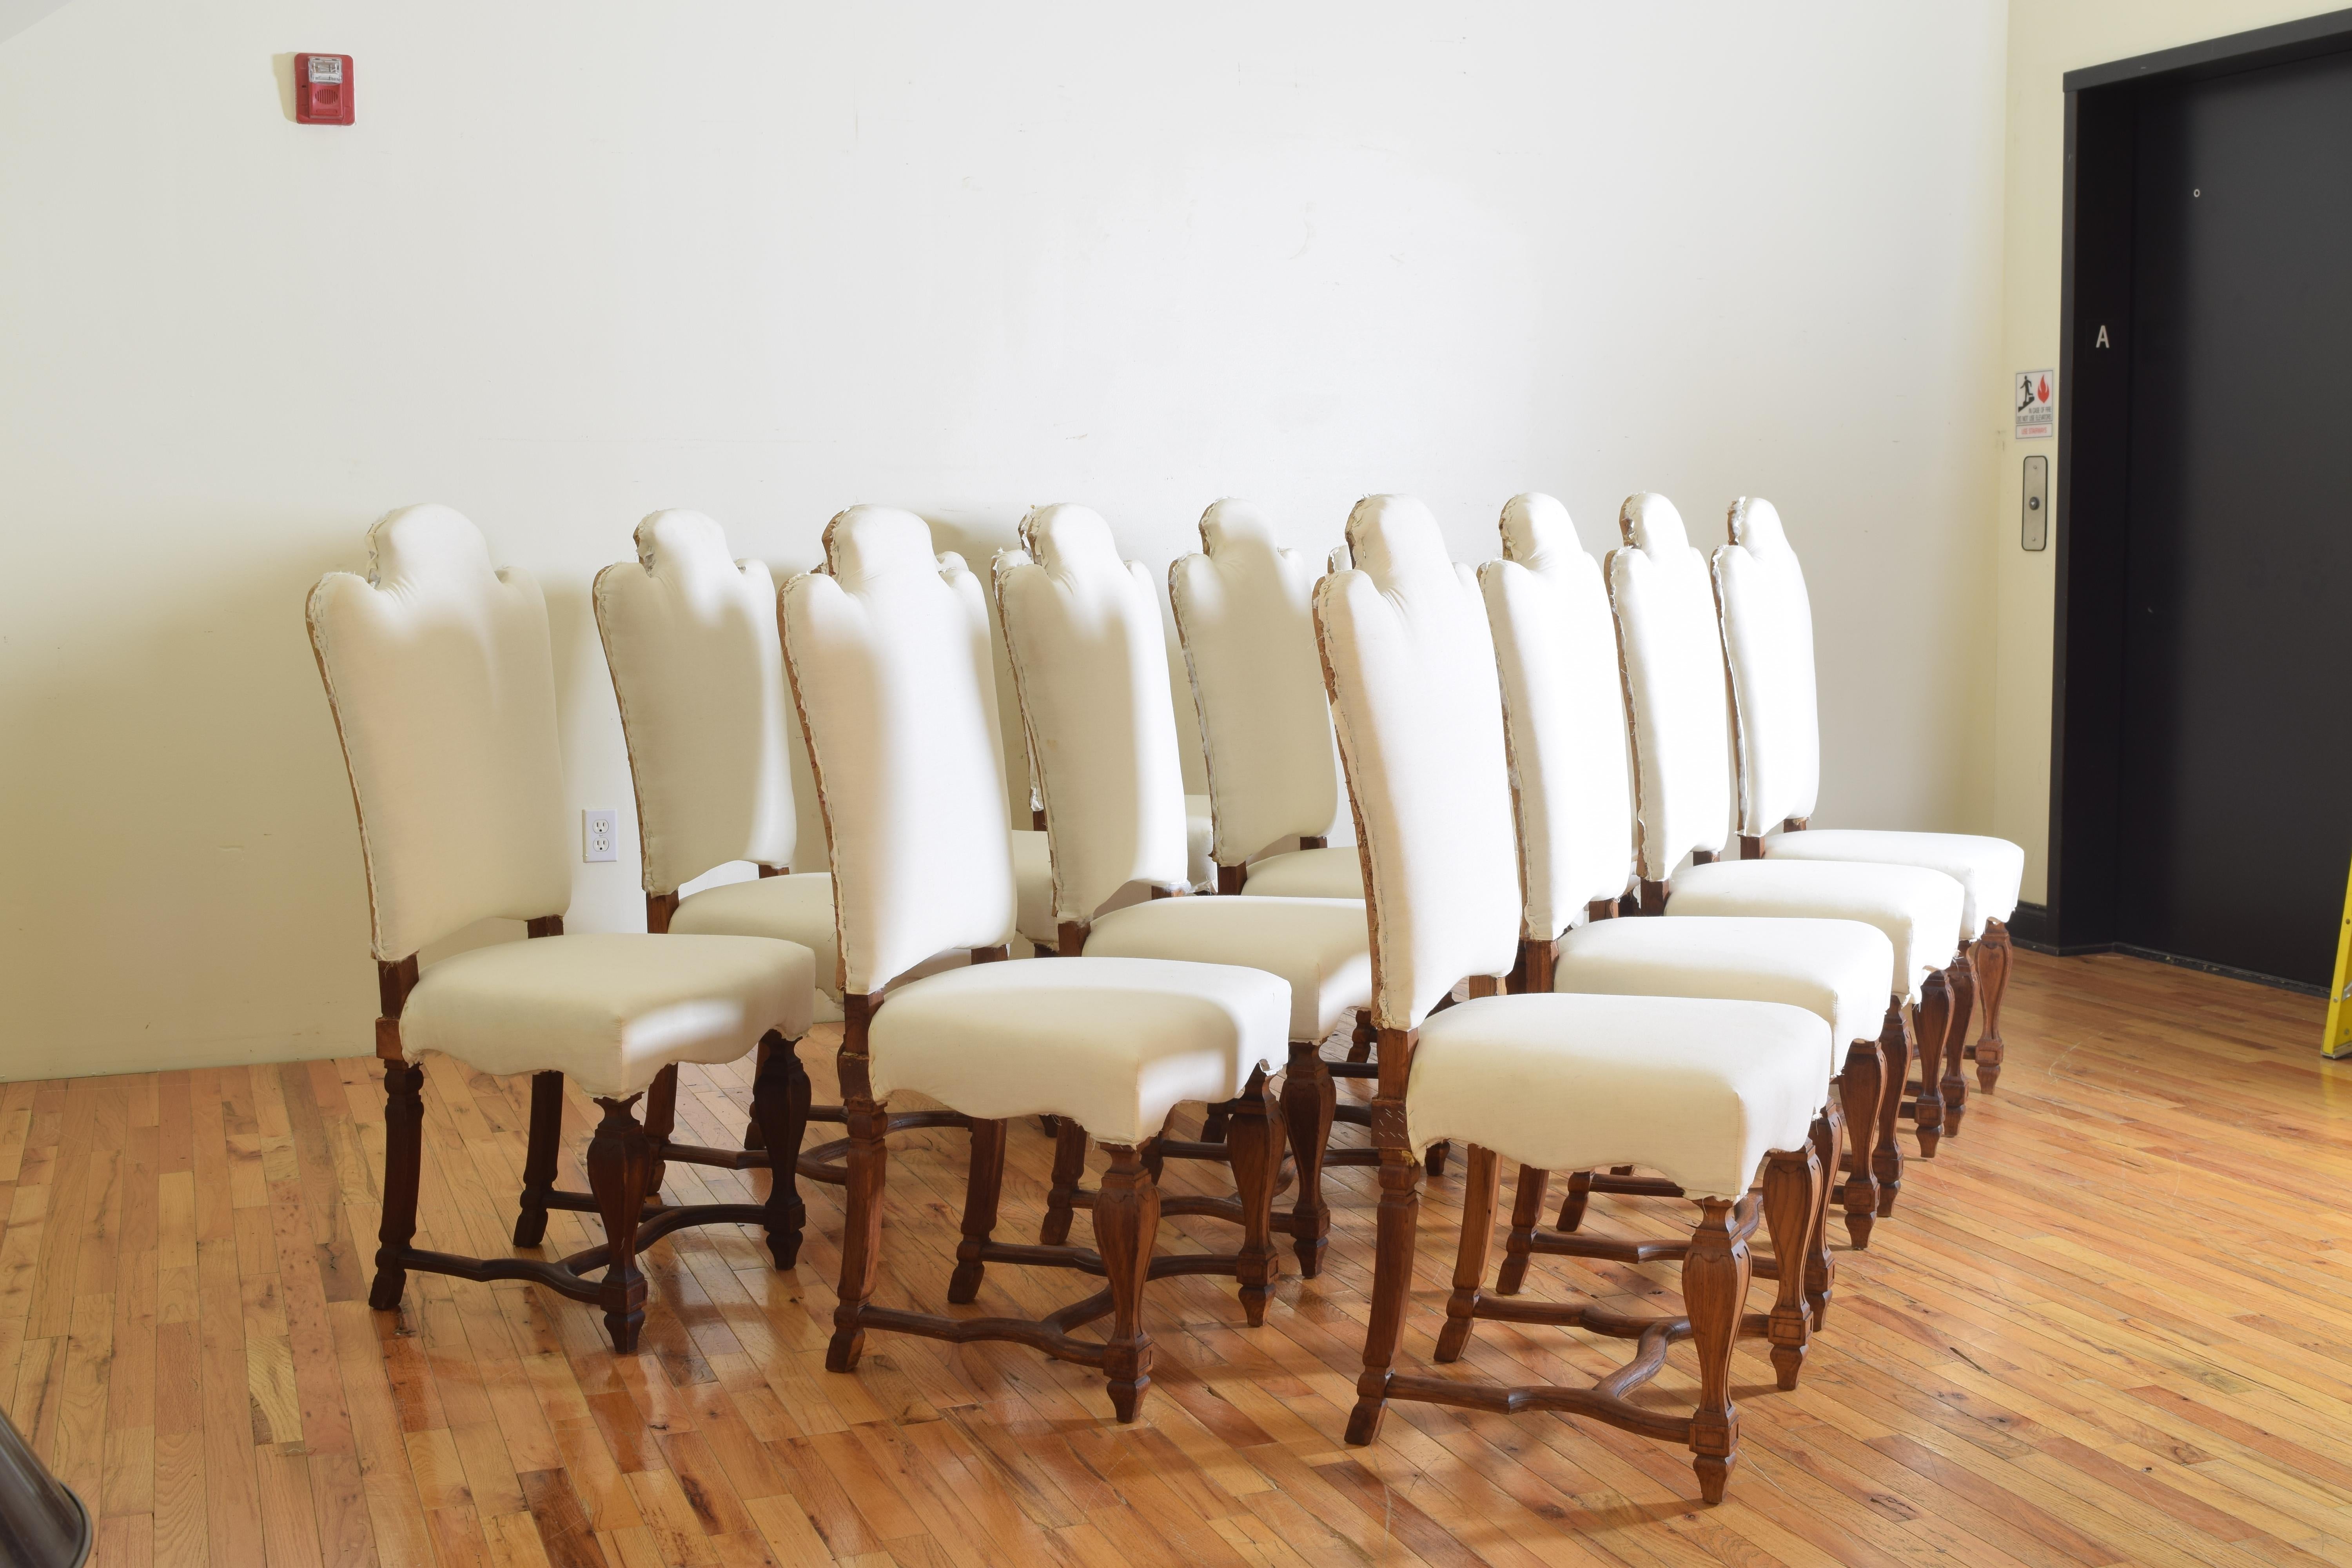 Walnut Set of 12 Italian Lxiv Style Wooden Dining Chairs from the 19th Century